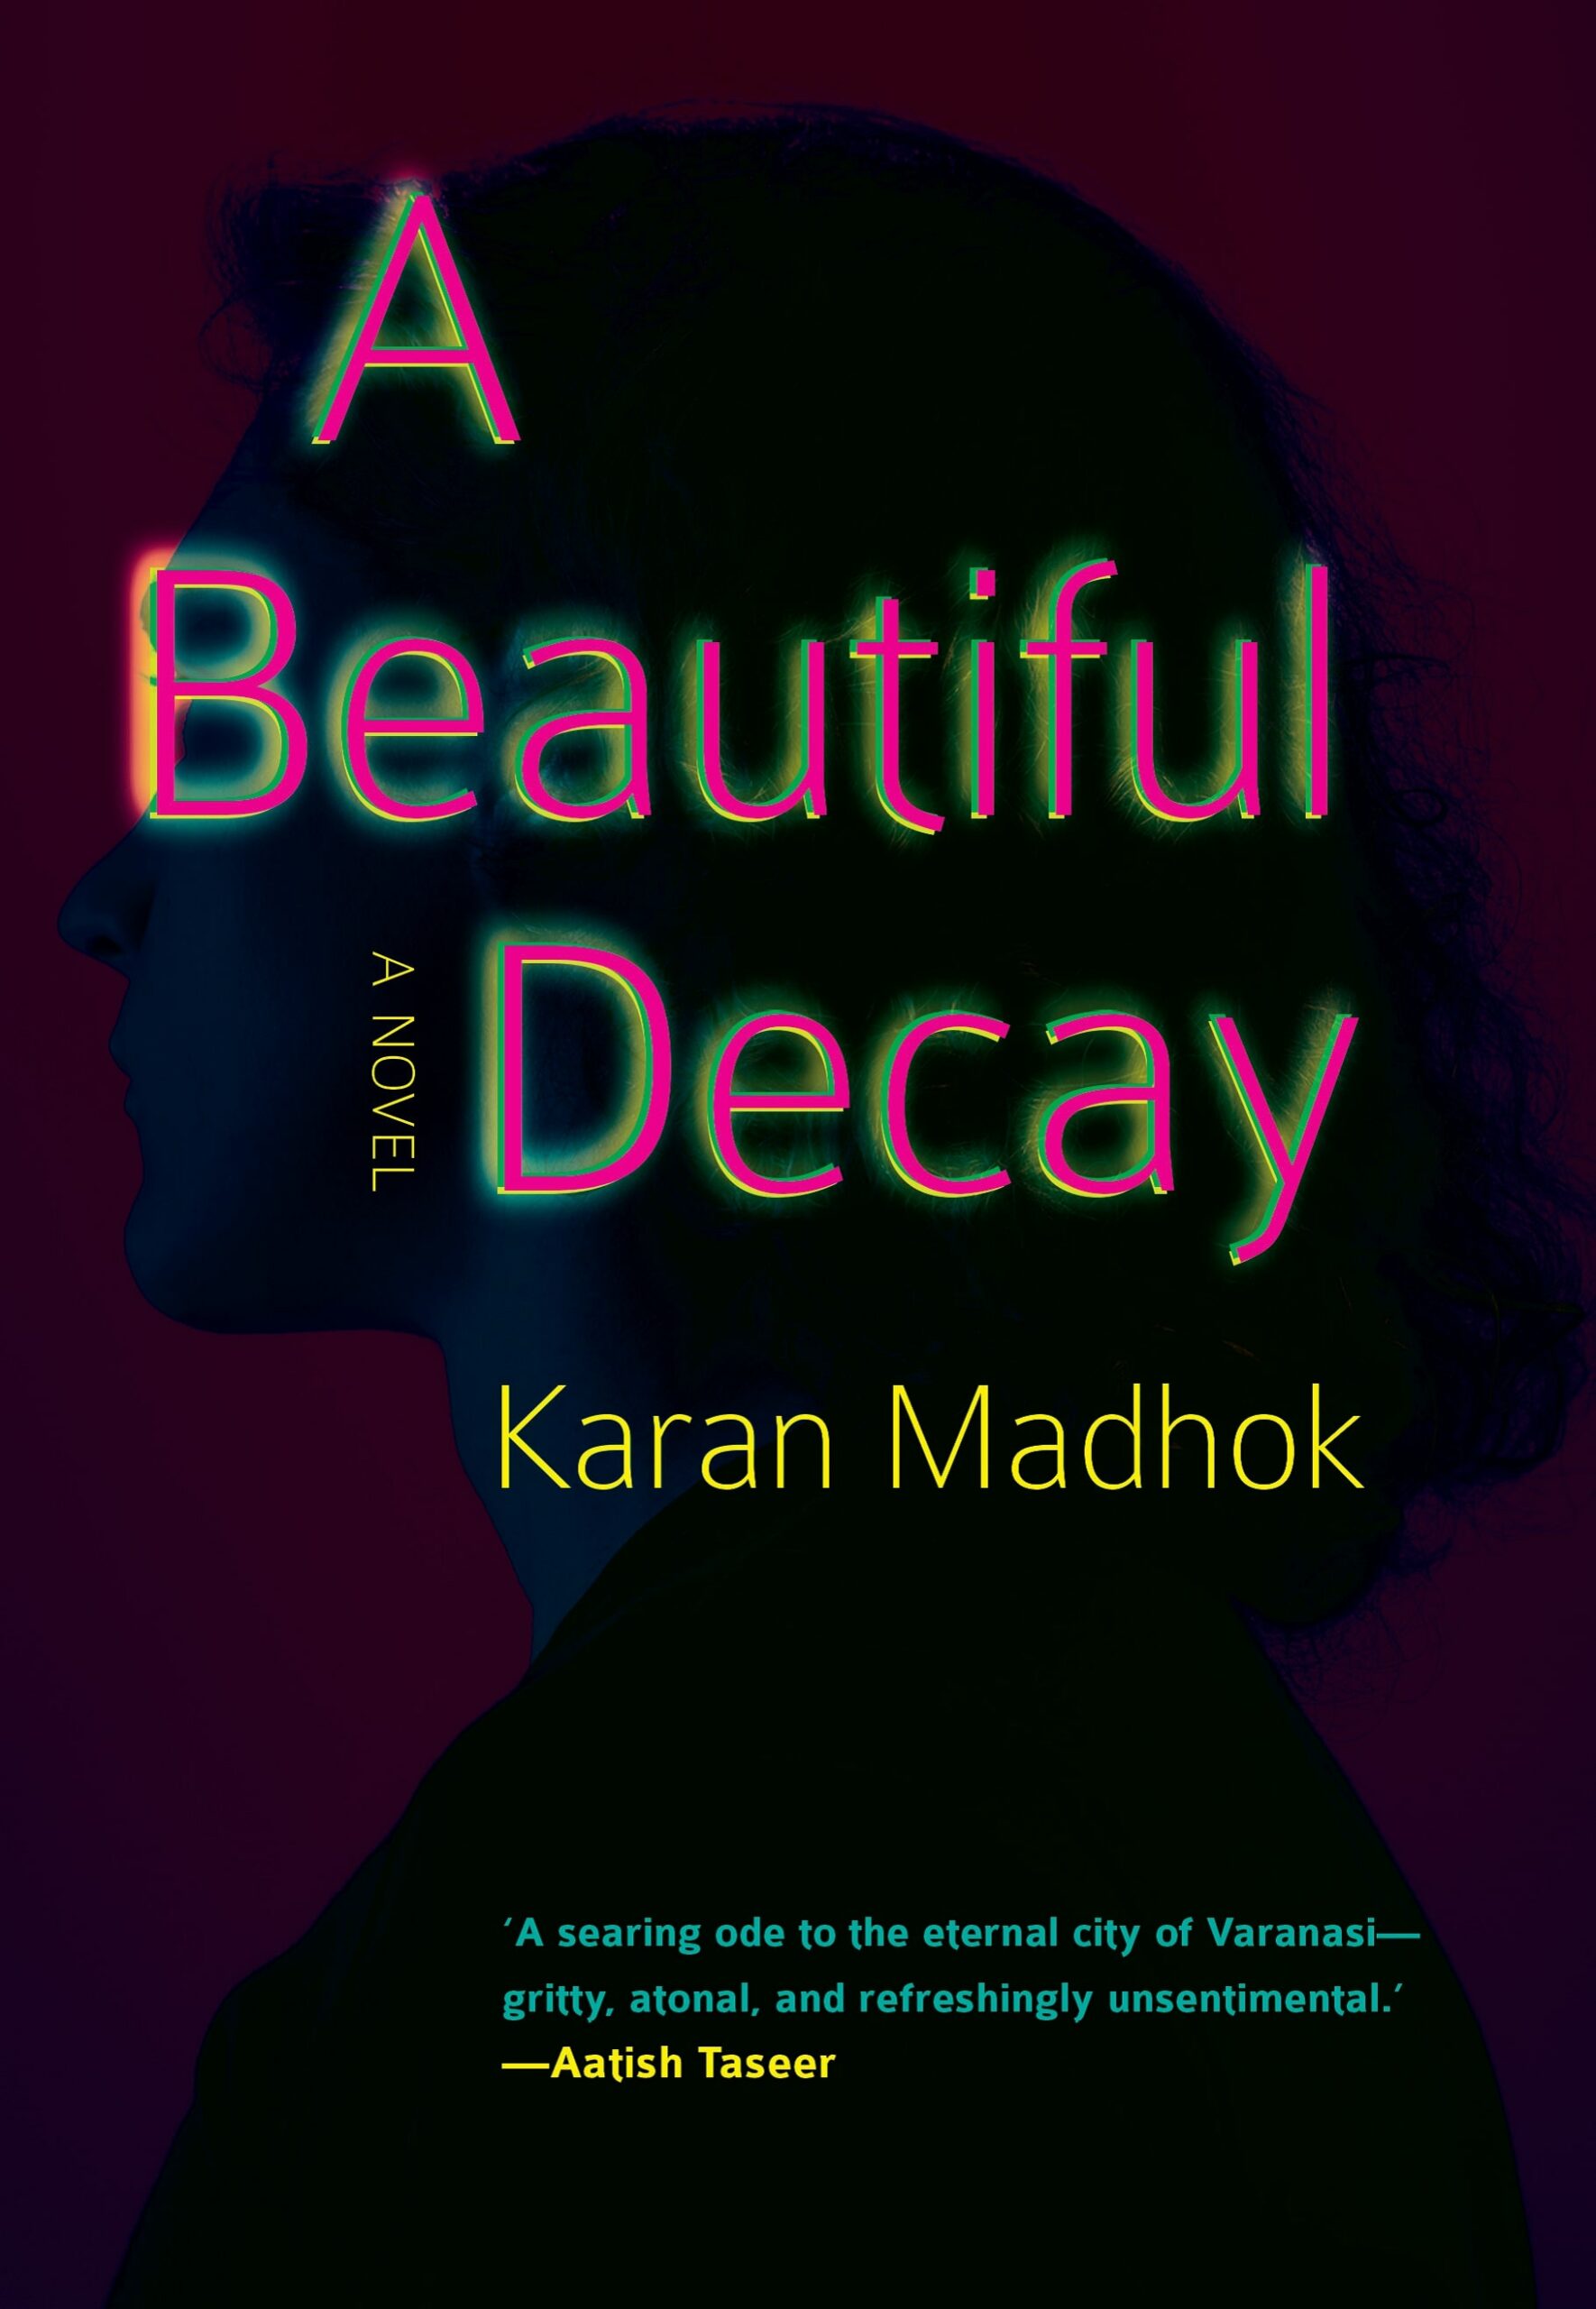 "A Beautiful Decay": Karan Madhok's debut novel deconstructs the hate and violence simmering beneath the surface in countries like India and America